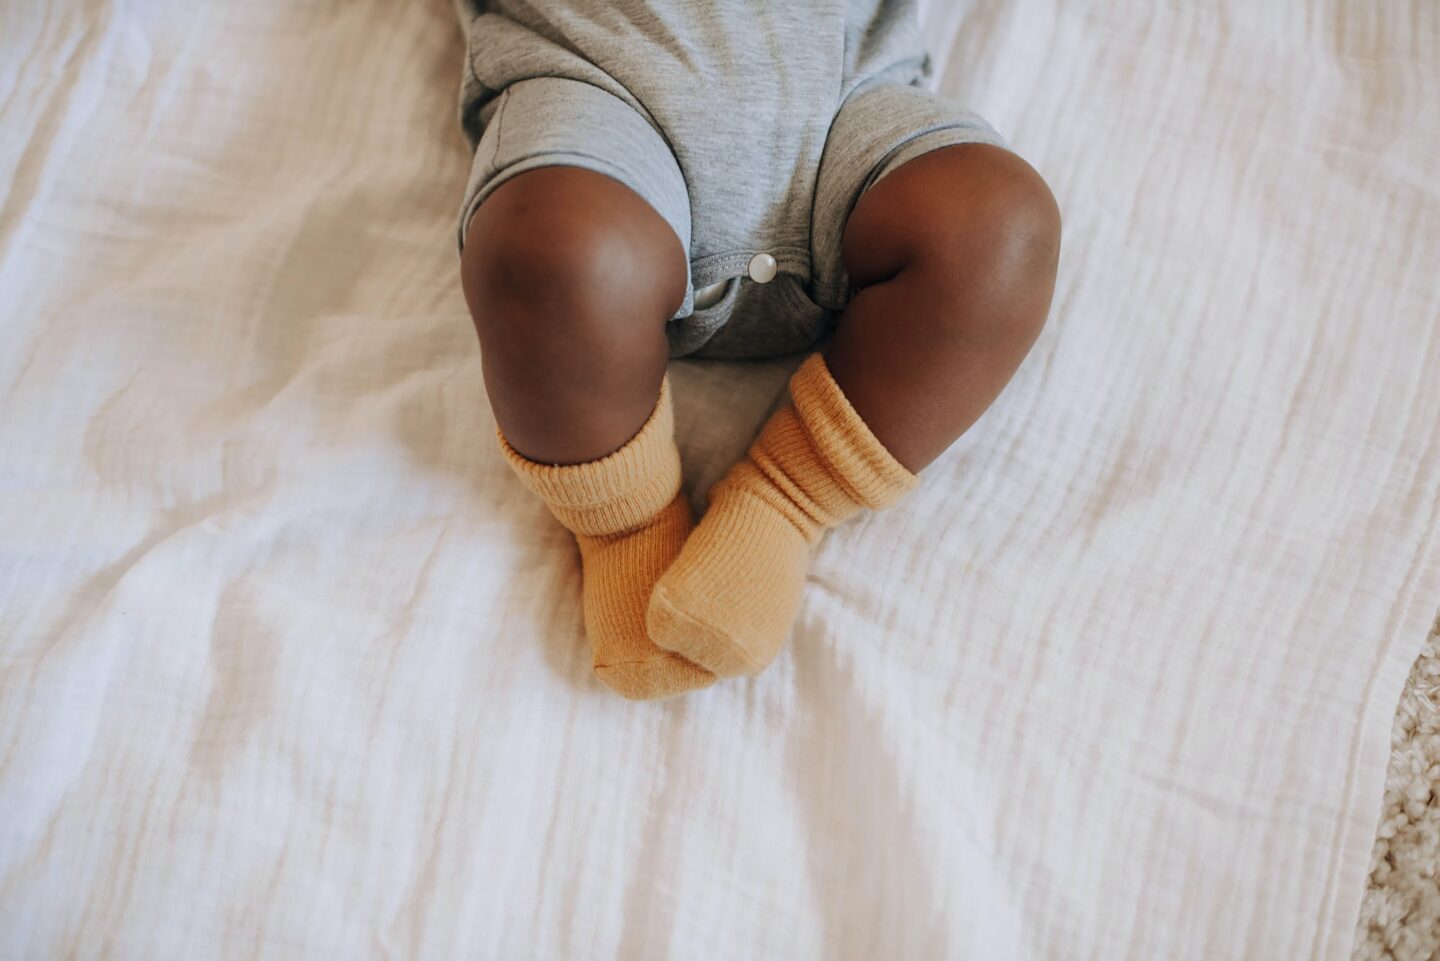 5 Products You Need to Keep Your Baby’s Skin Super Soft and Smooth